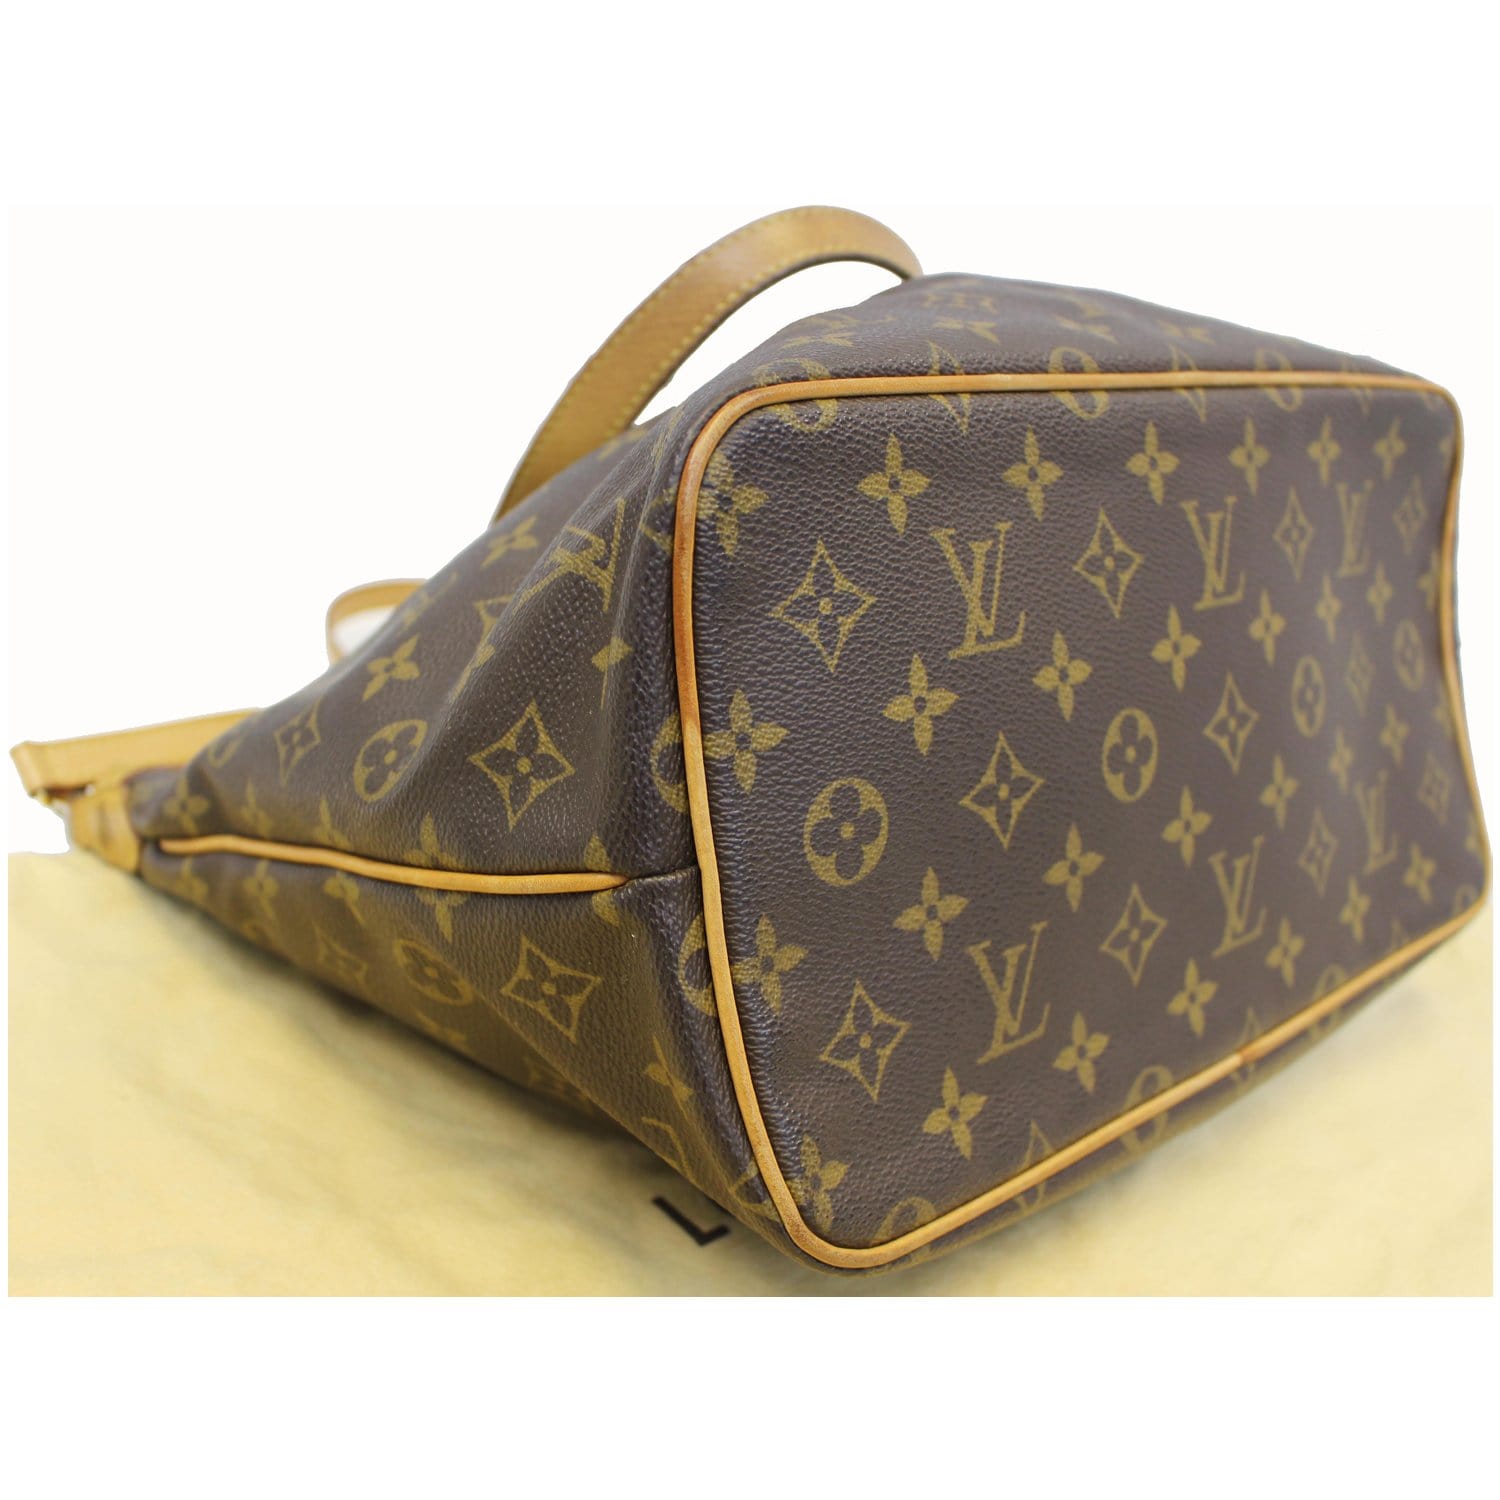 Louis Vuitton Palermo pm and gm 